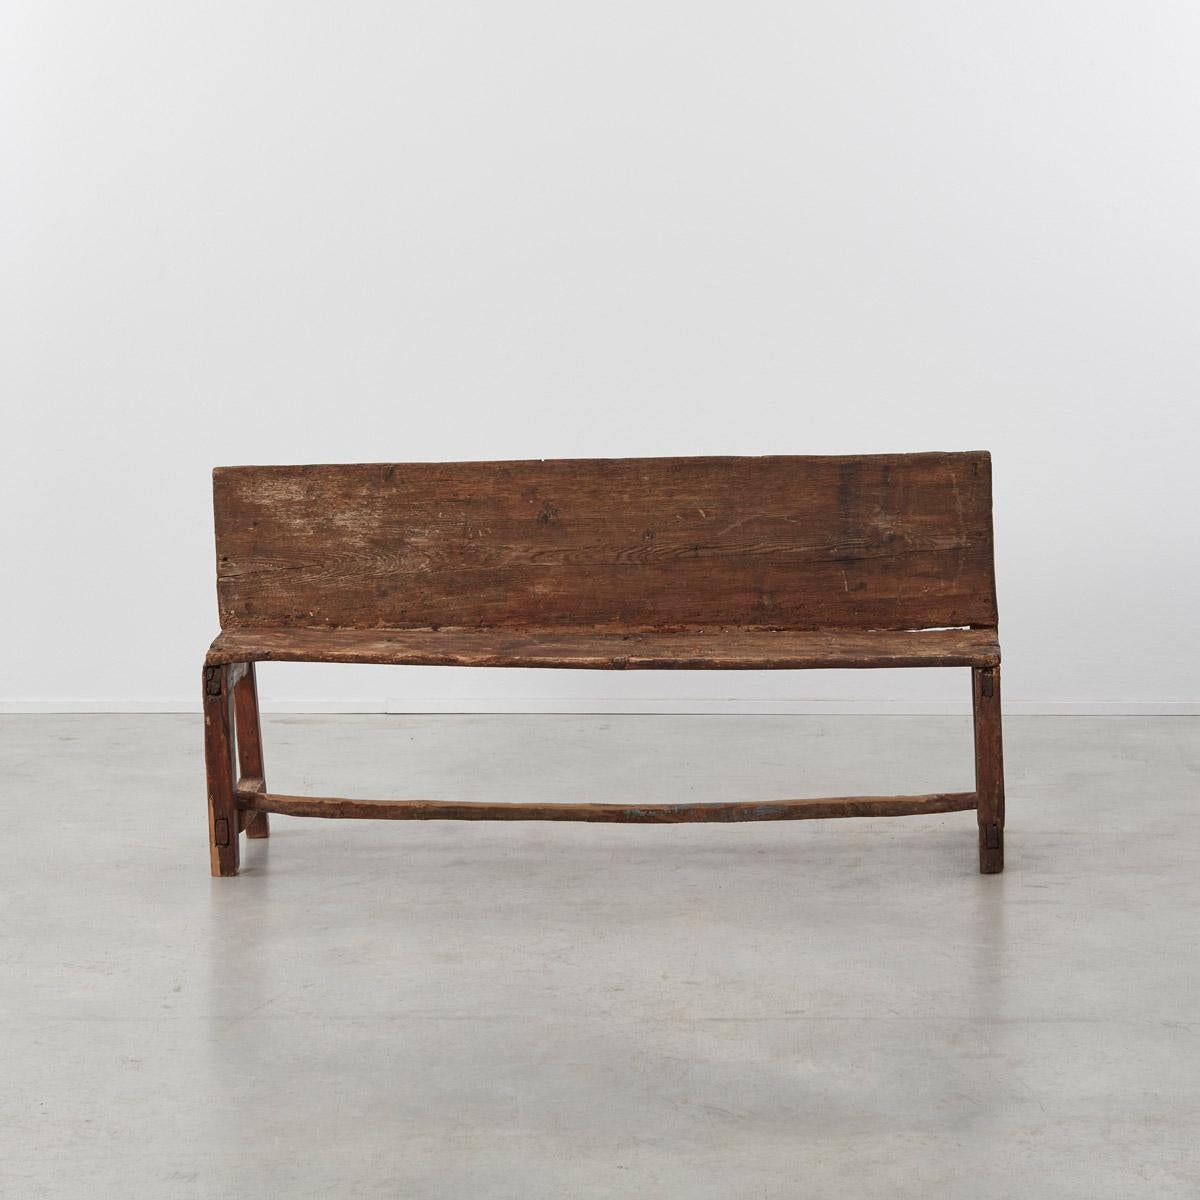 French 19th Century Wooden Bench, Pyrenees, France, 1800s